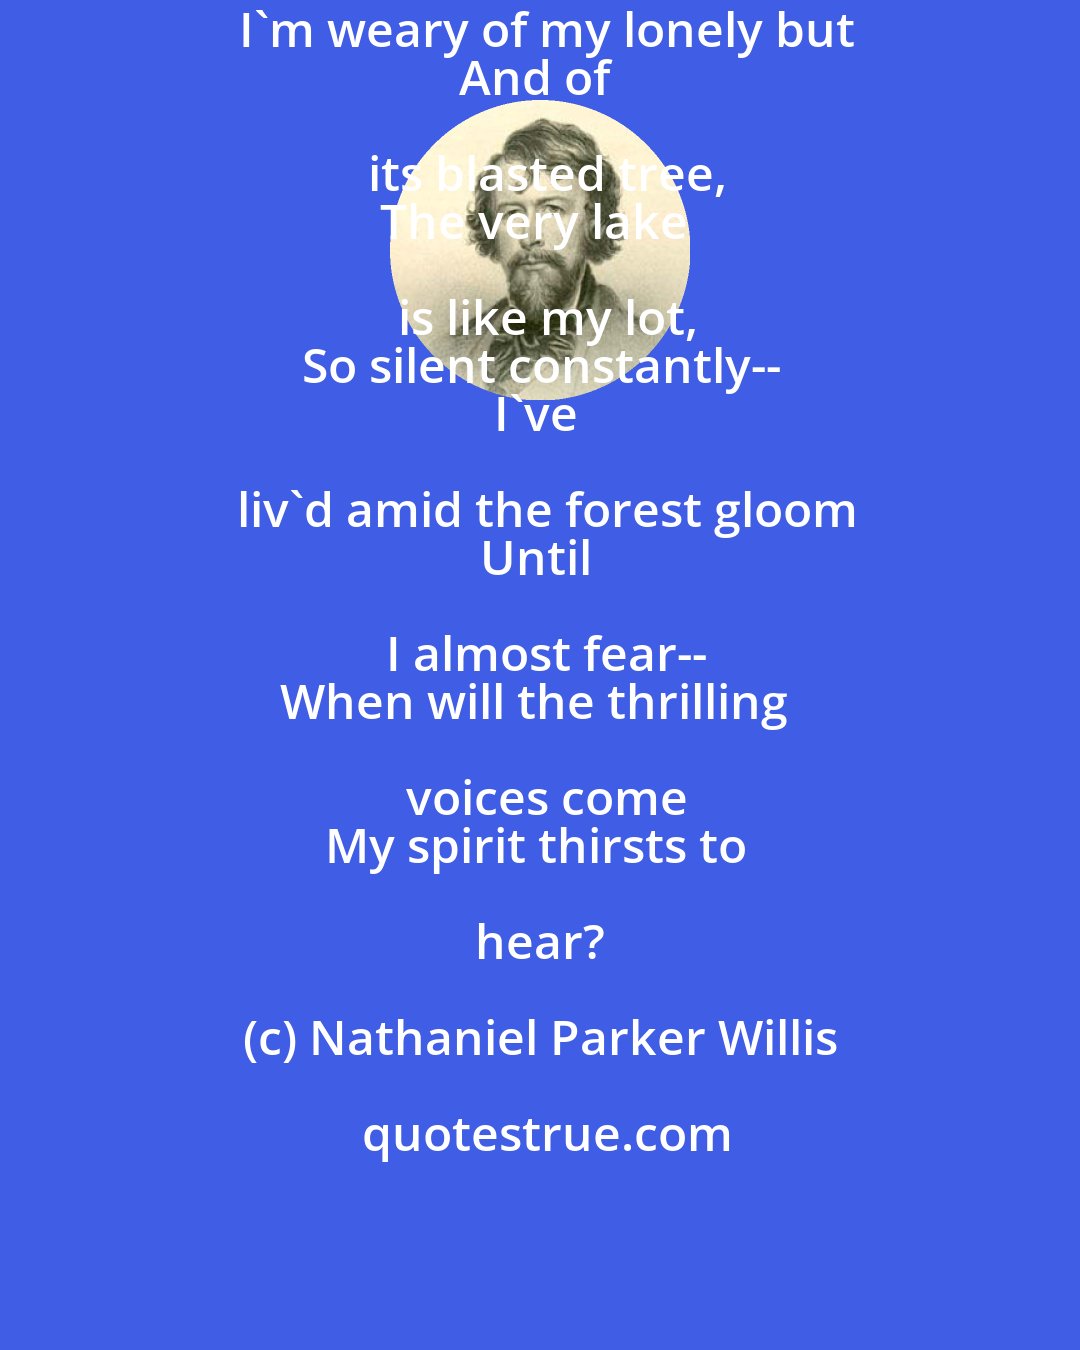 Nathaniel Parker Willis: I'm weary of my lonely but
And of its blasted tree,
The very lake is like my lot,
So silent constantly--
I've liv'd amid the forest gloom
Until I almost fear--
When will the thrilling voices come
My spirit thirsts to hear?